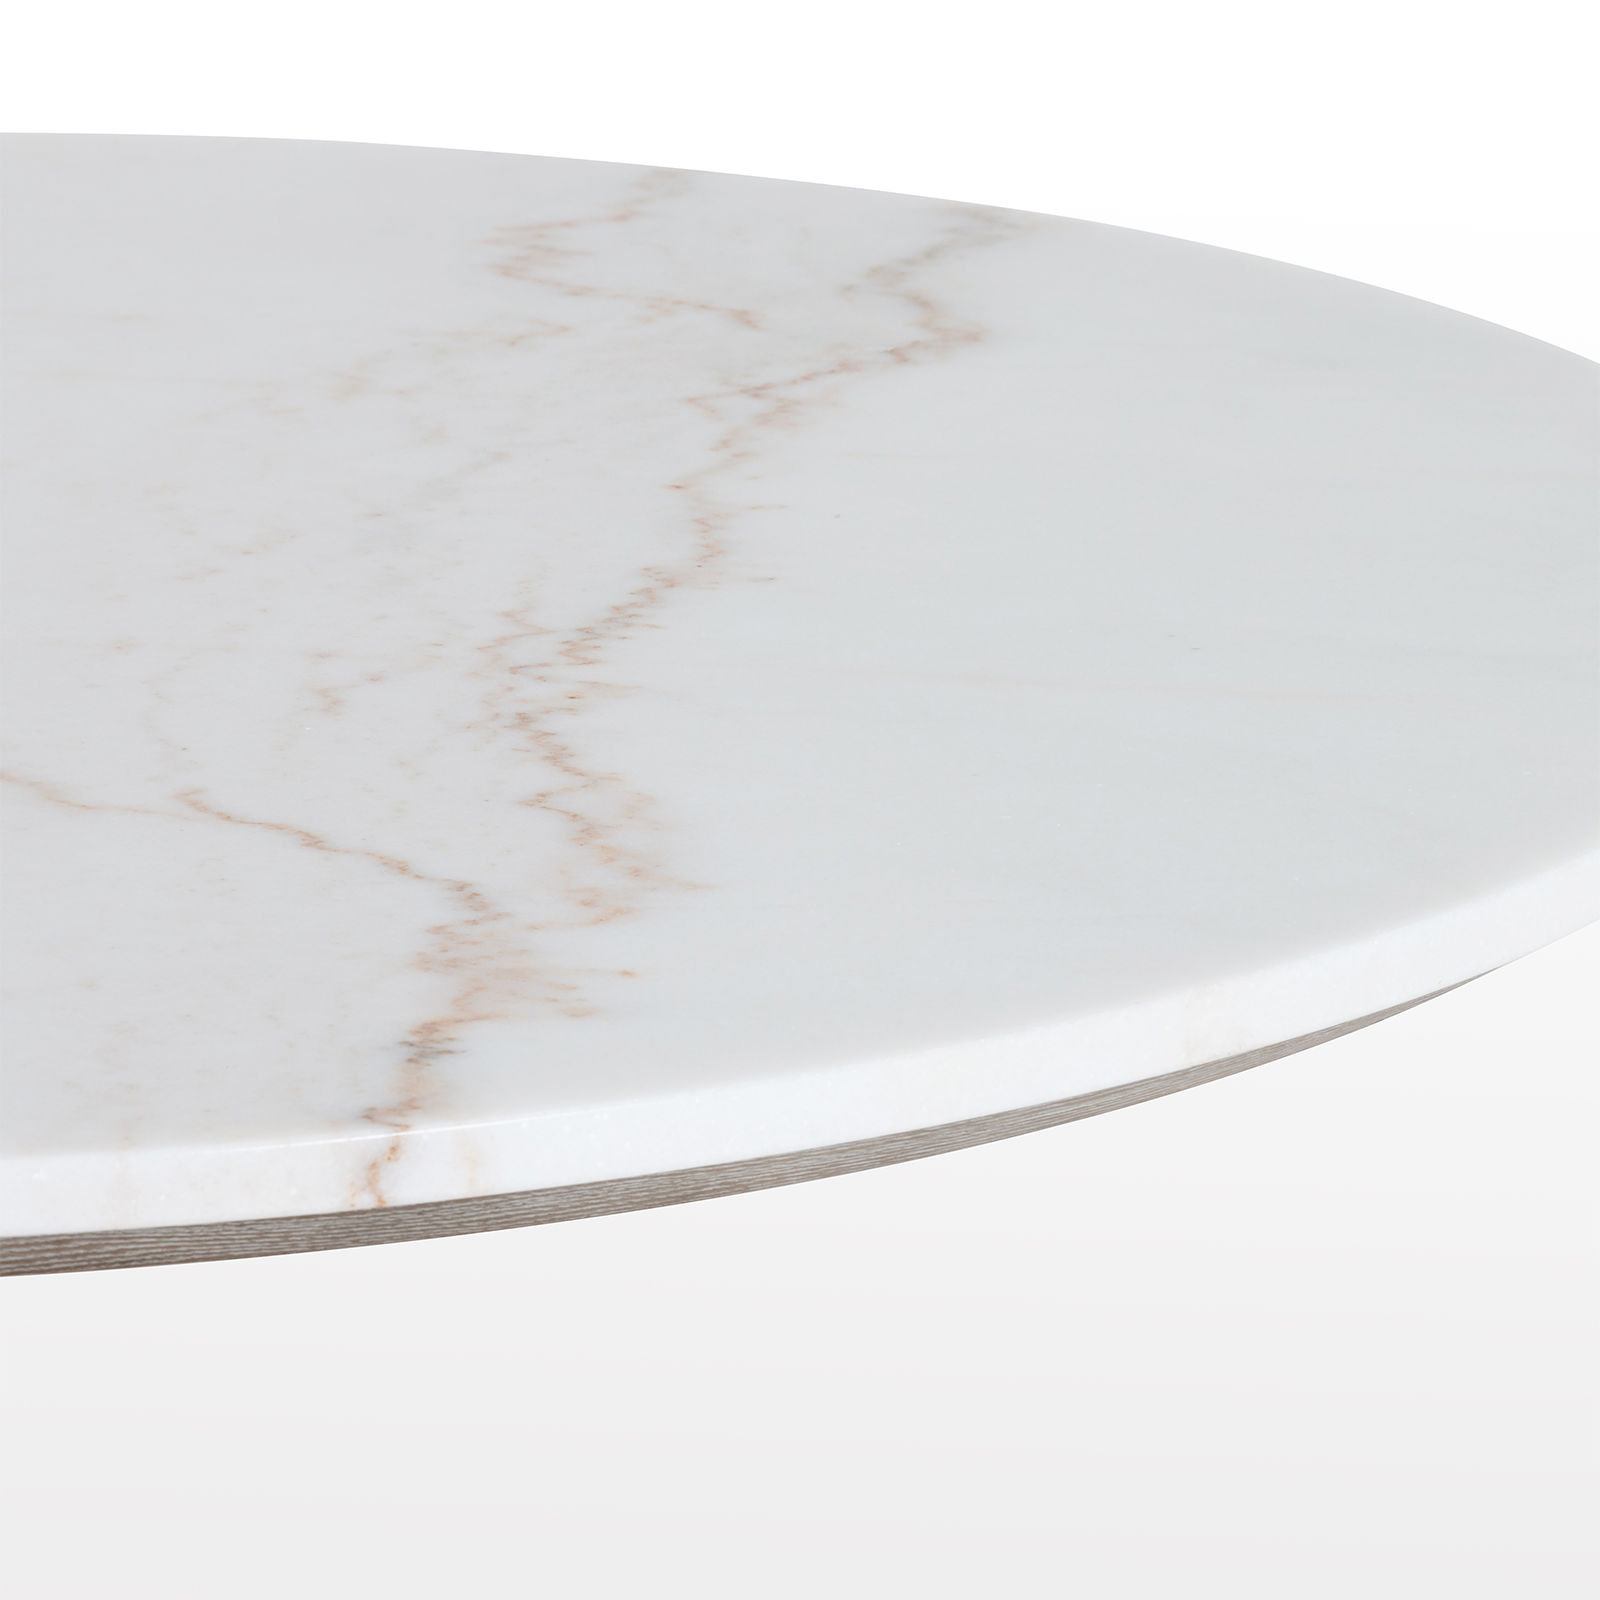 Mica 42" Bistro Table